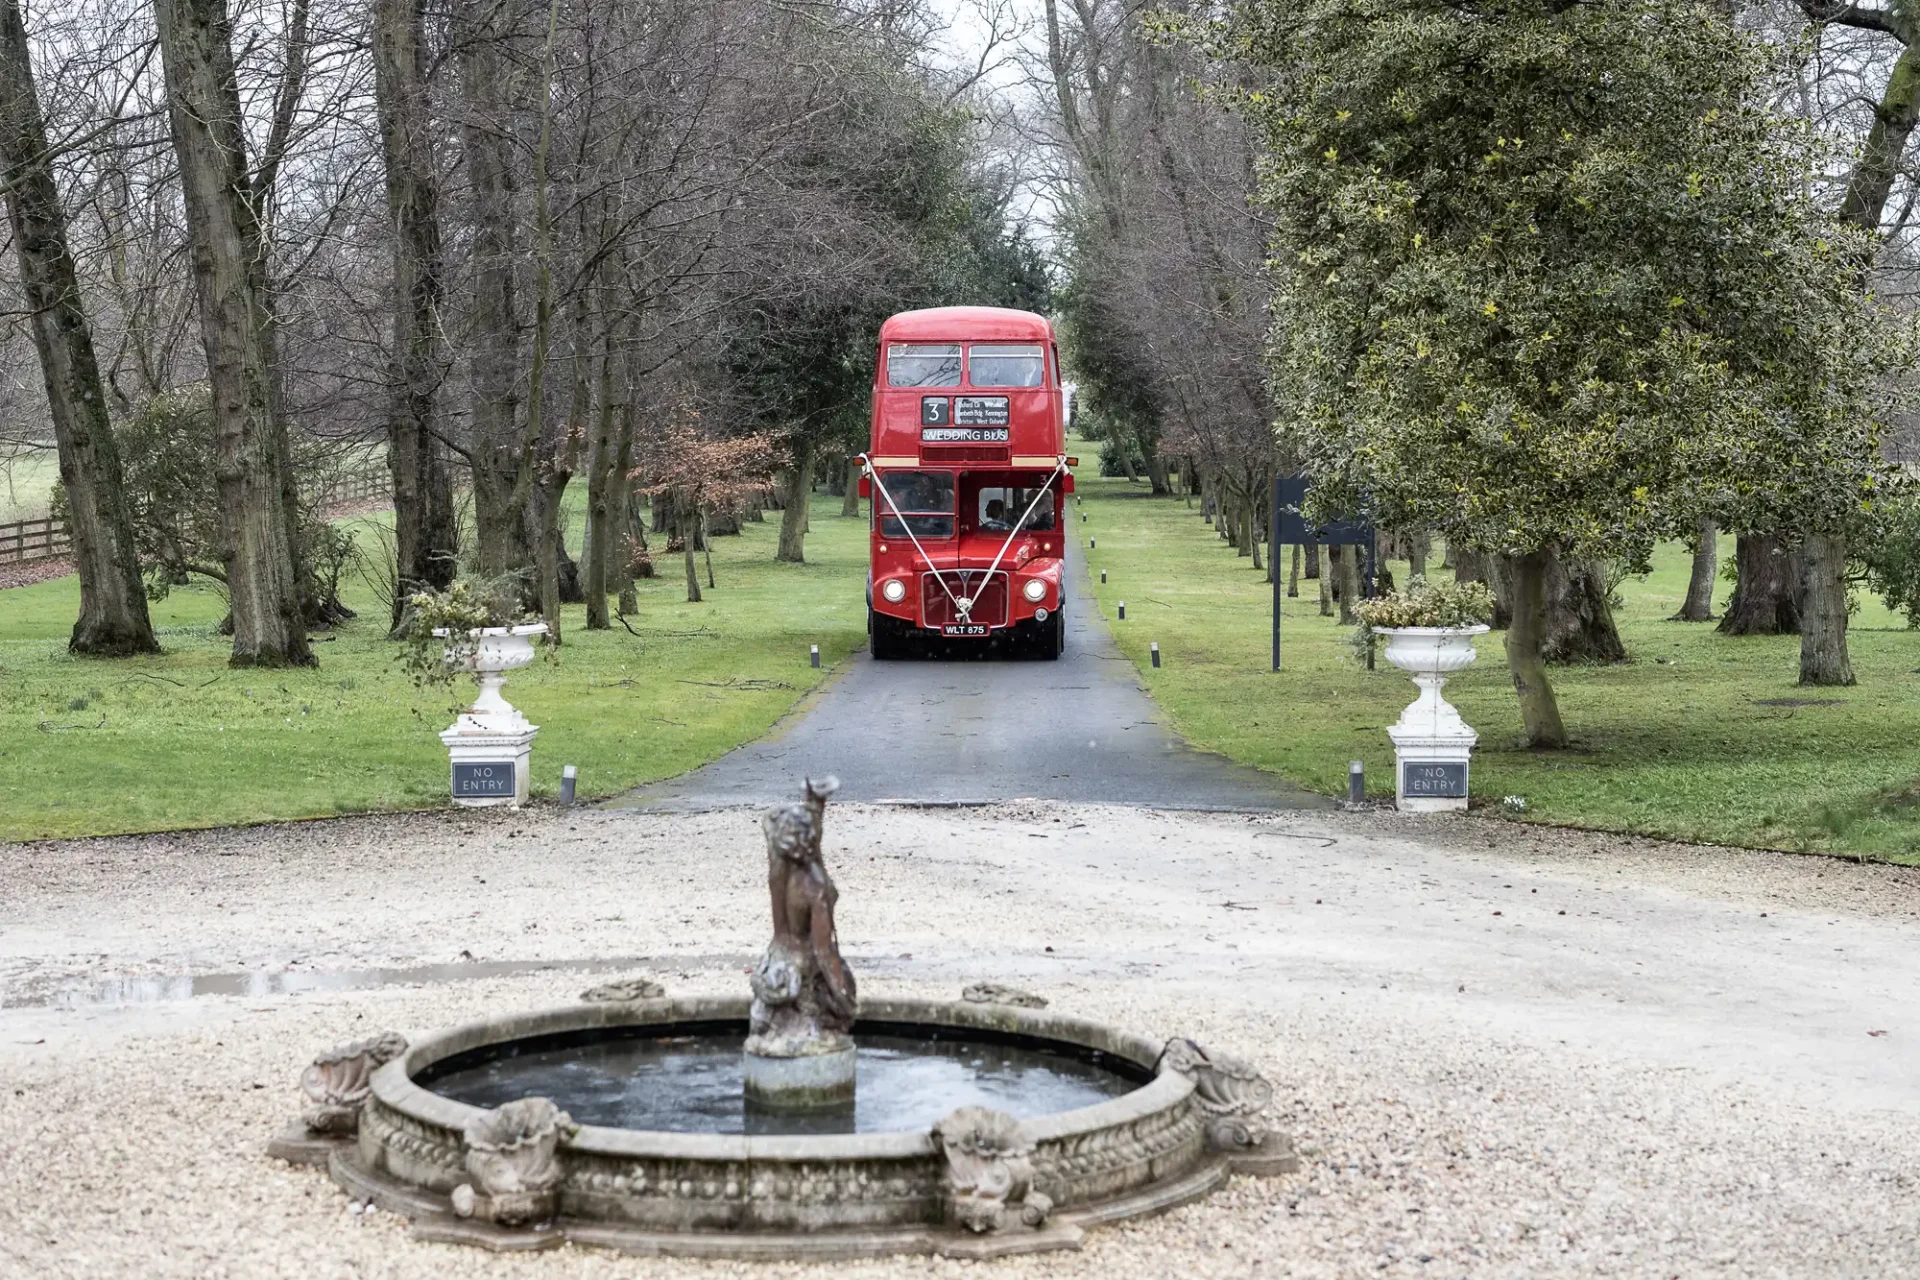 A red double-decker bus drives along a tree-lined gravel path with a small stone fountain in the foreground.